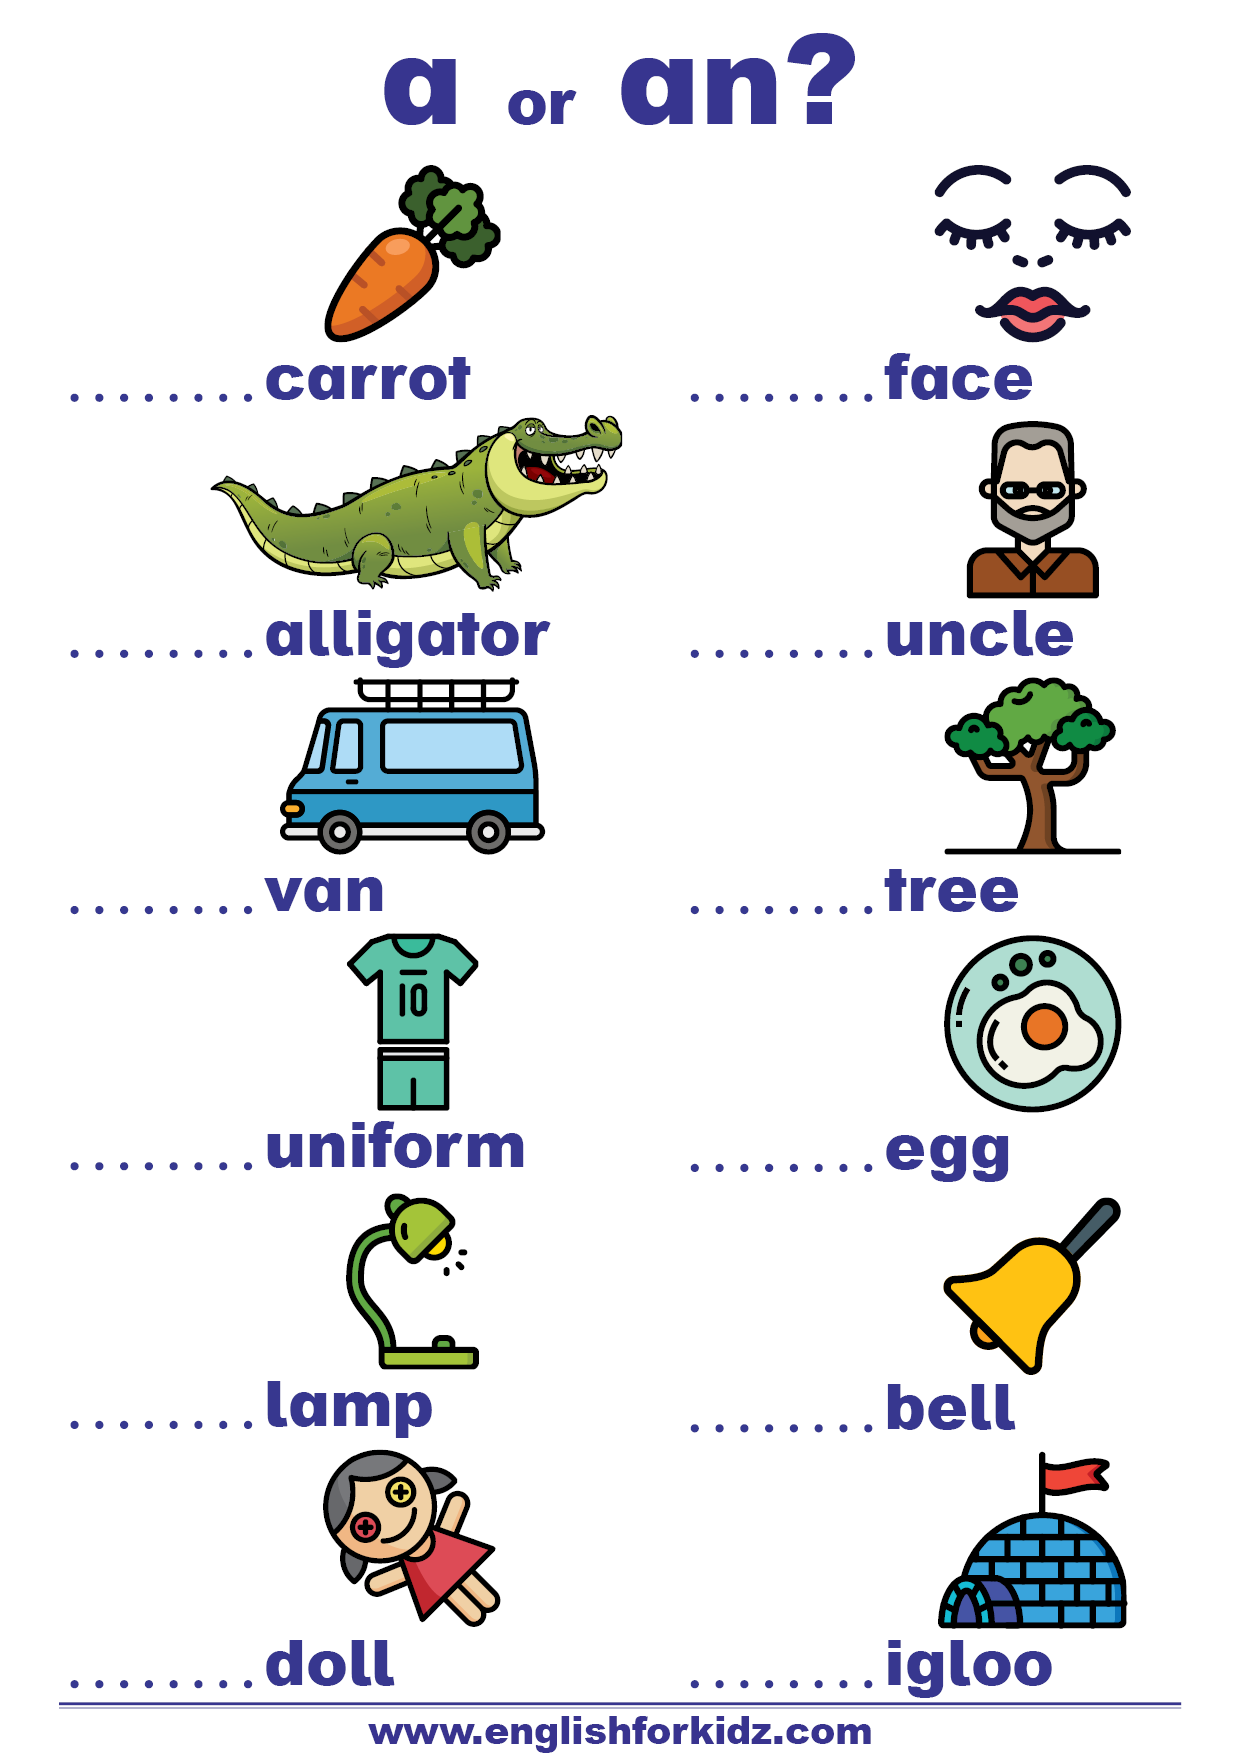 english-for-kids-step-by-step-indefinite-articles-worksheets-a-or-an